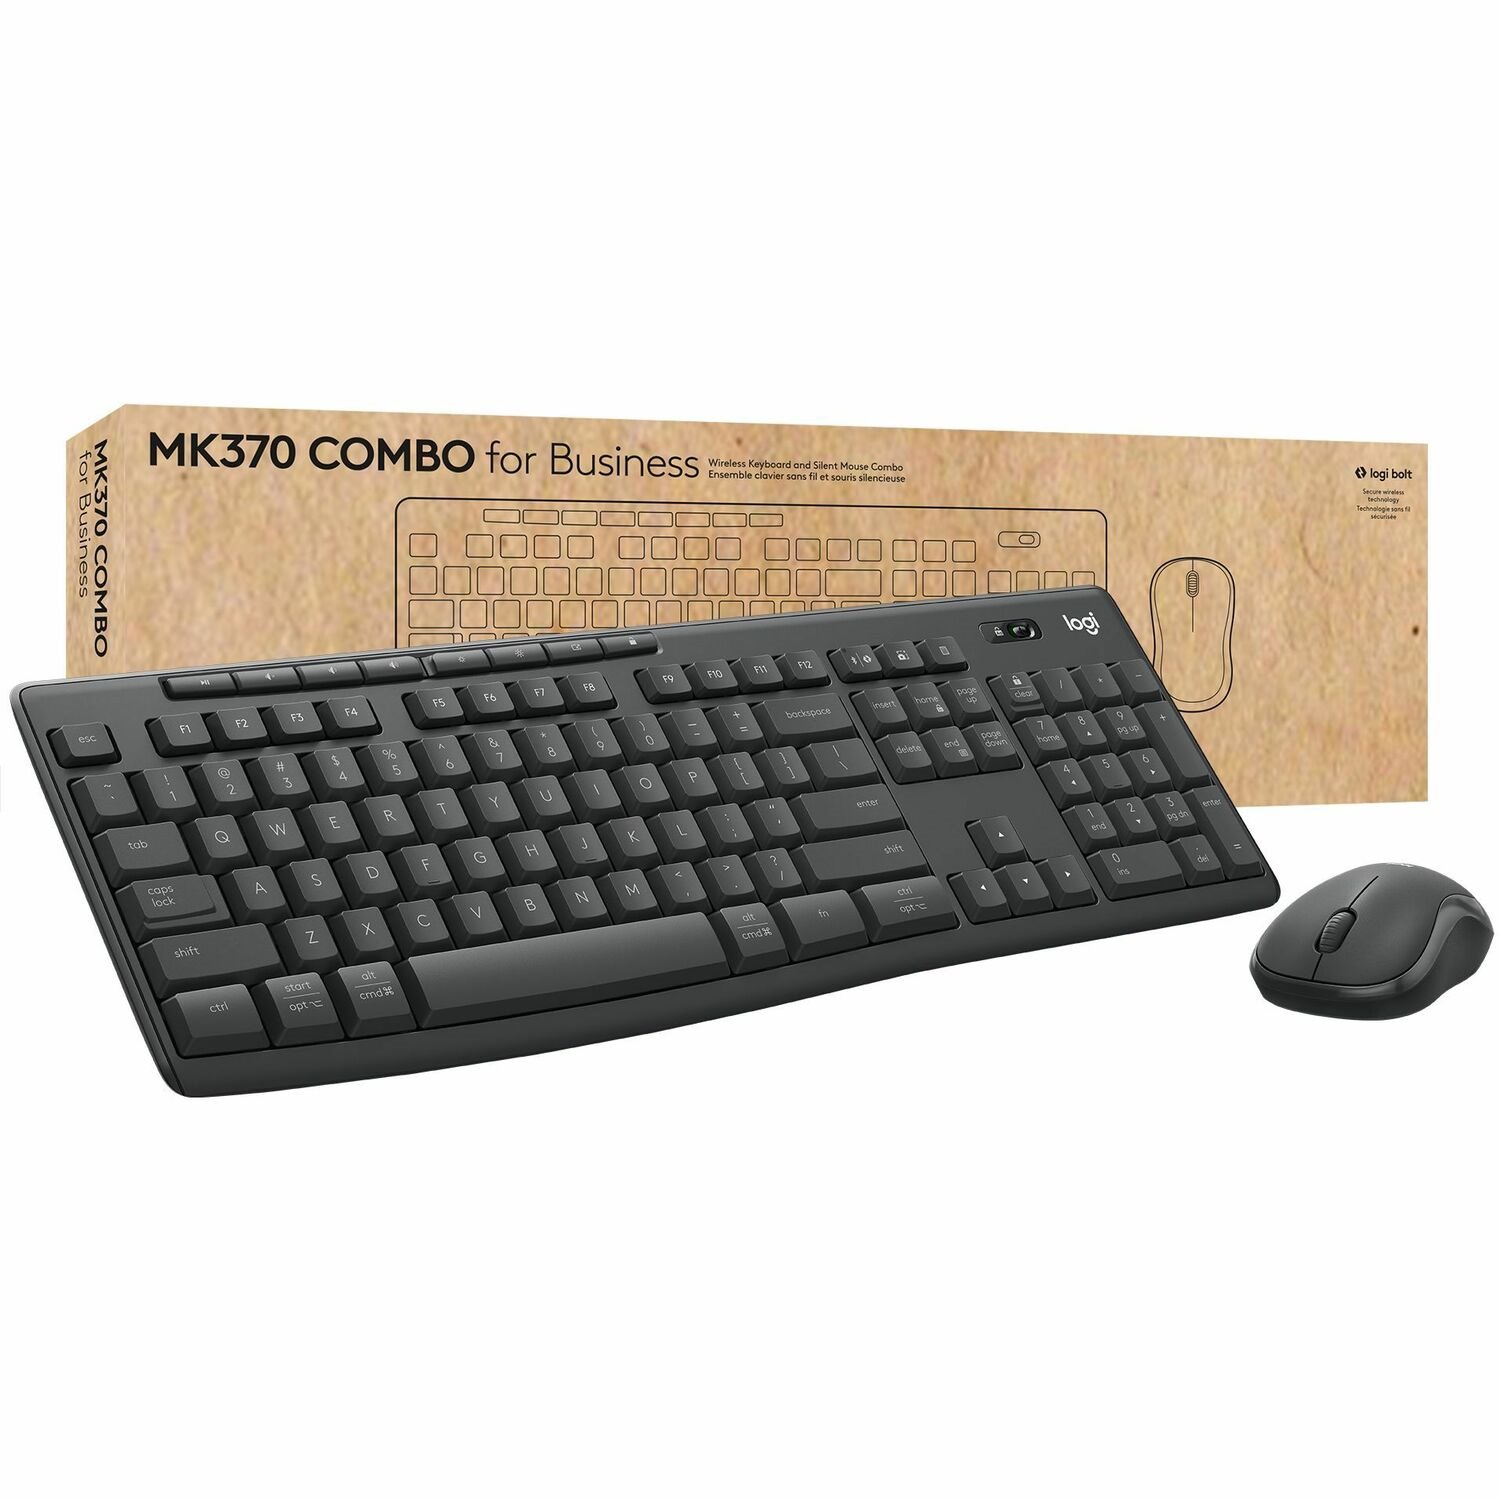 Logitech MK370 Combo for Business, Full-Size Wireless Keyboard and Wireless Mouse